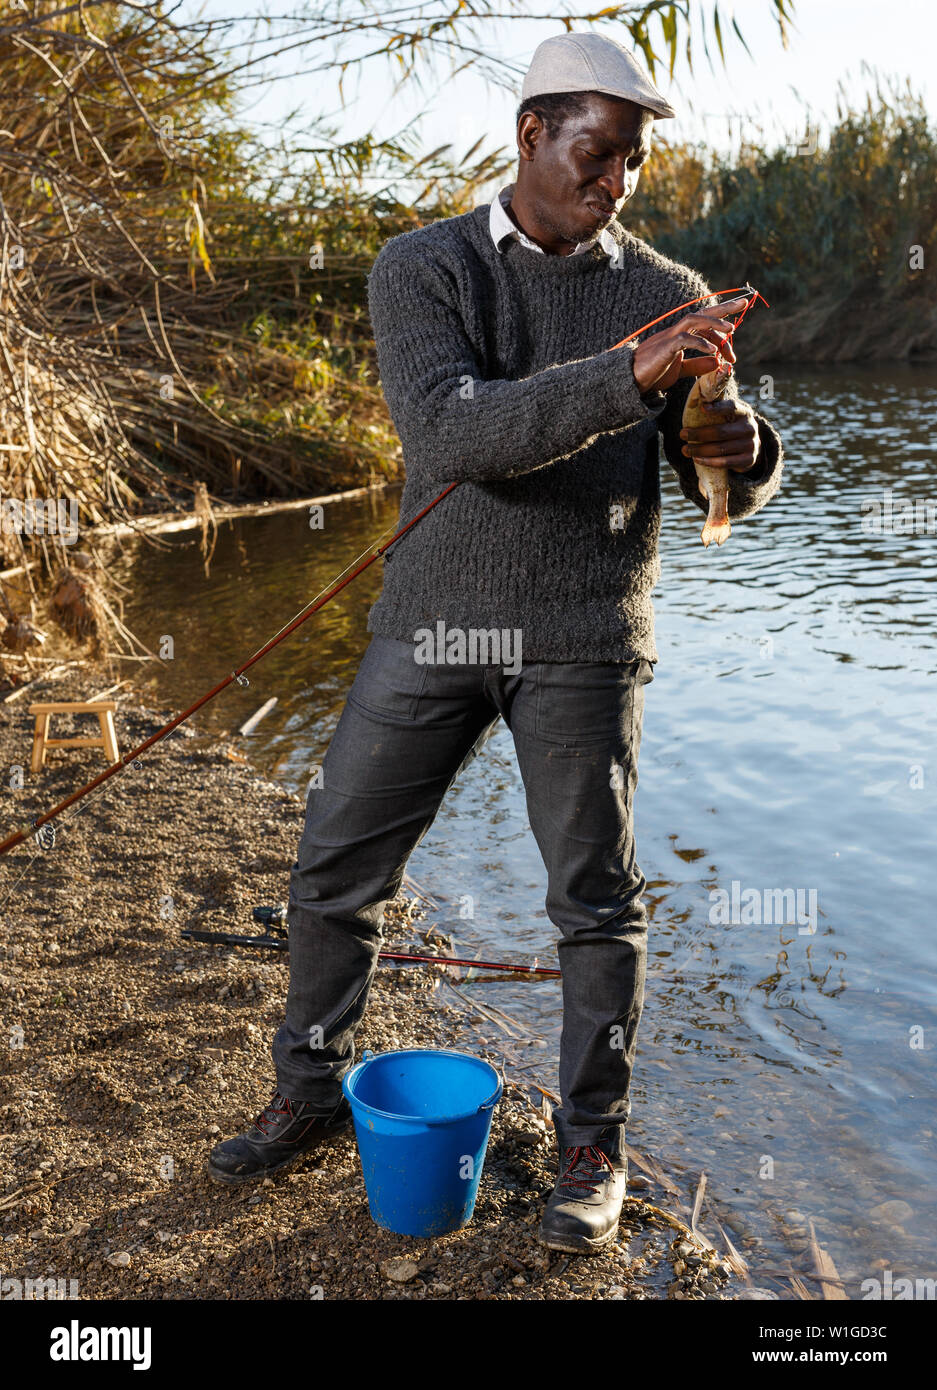 Mature African man standing near river and pulling fish on hook Stock Photo